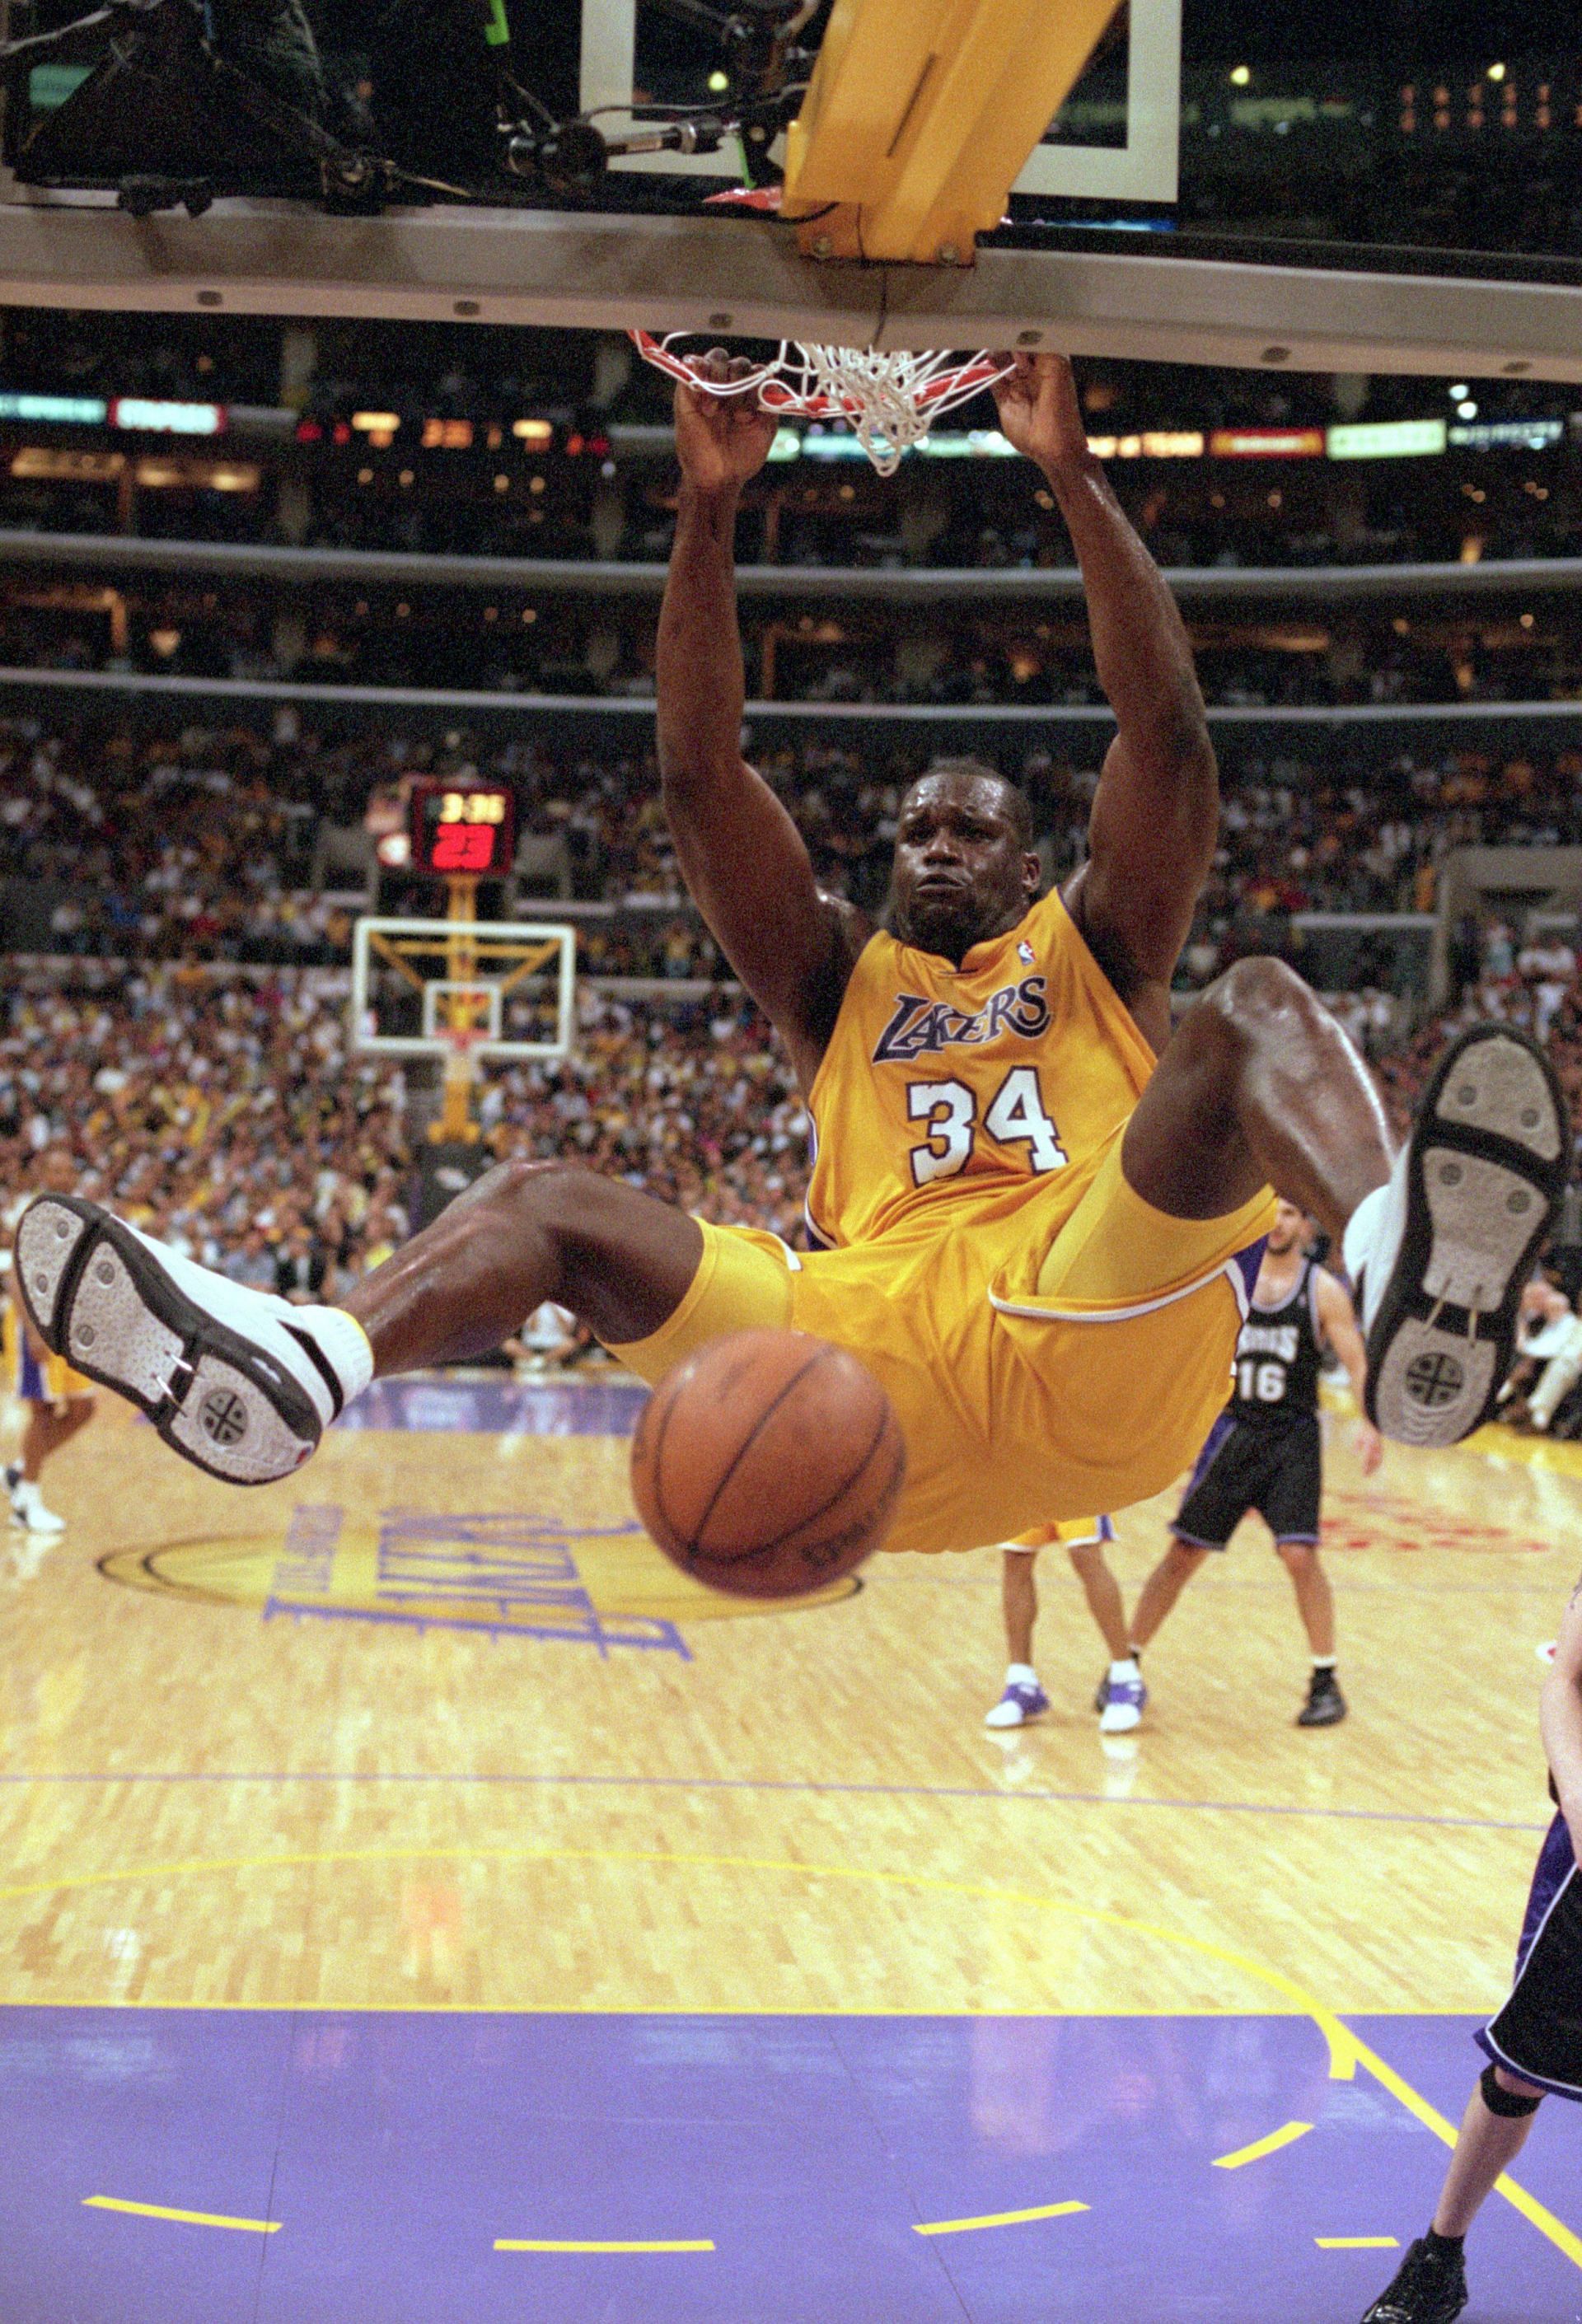 Shaquille O'Neal was one of the most explosive centers in the league